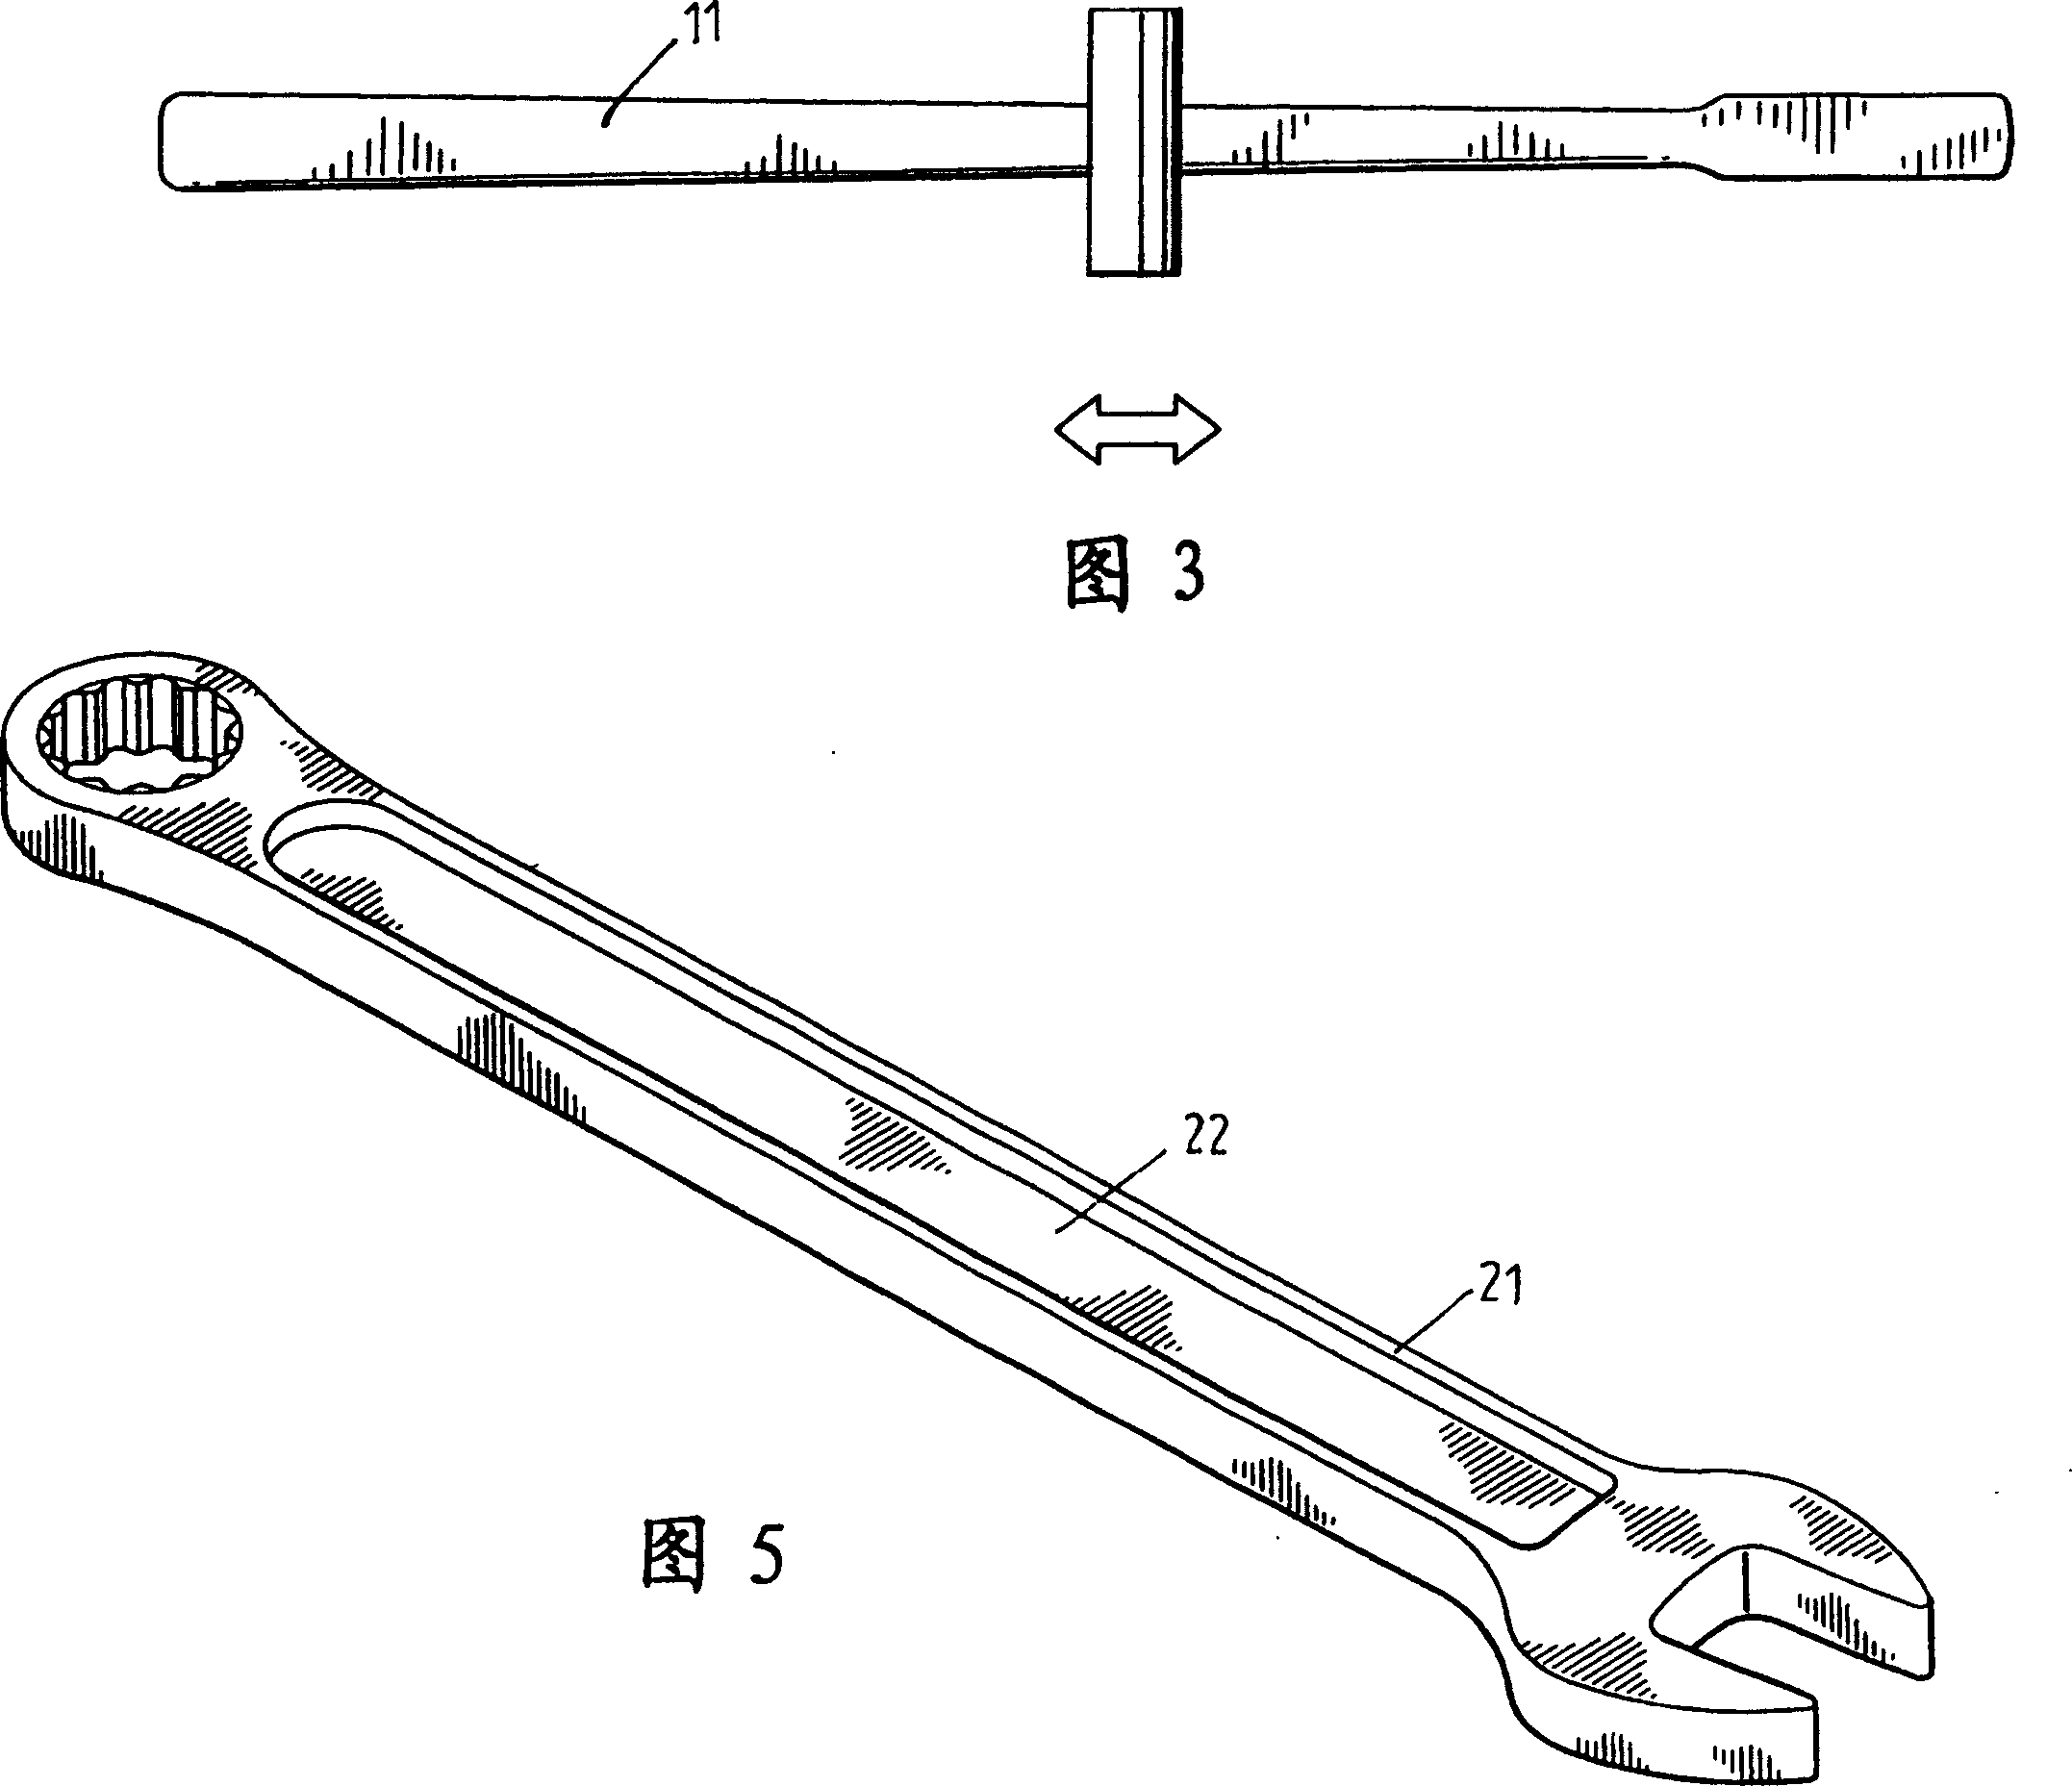 Producing method for H-shape spanner